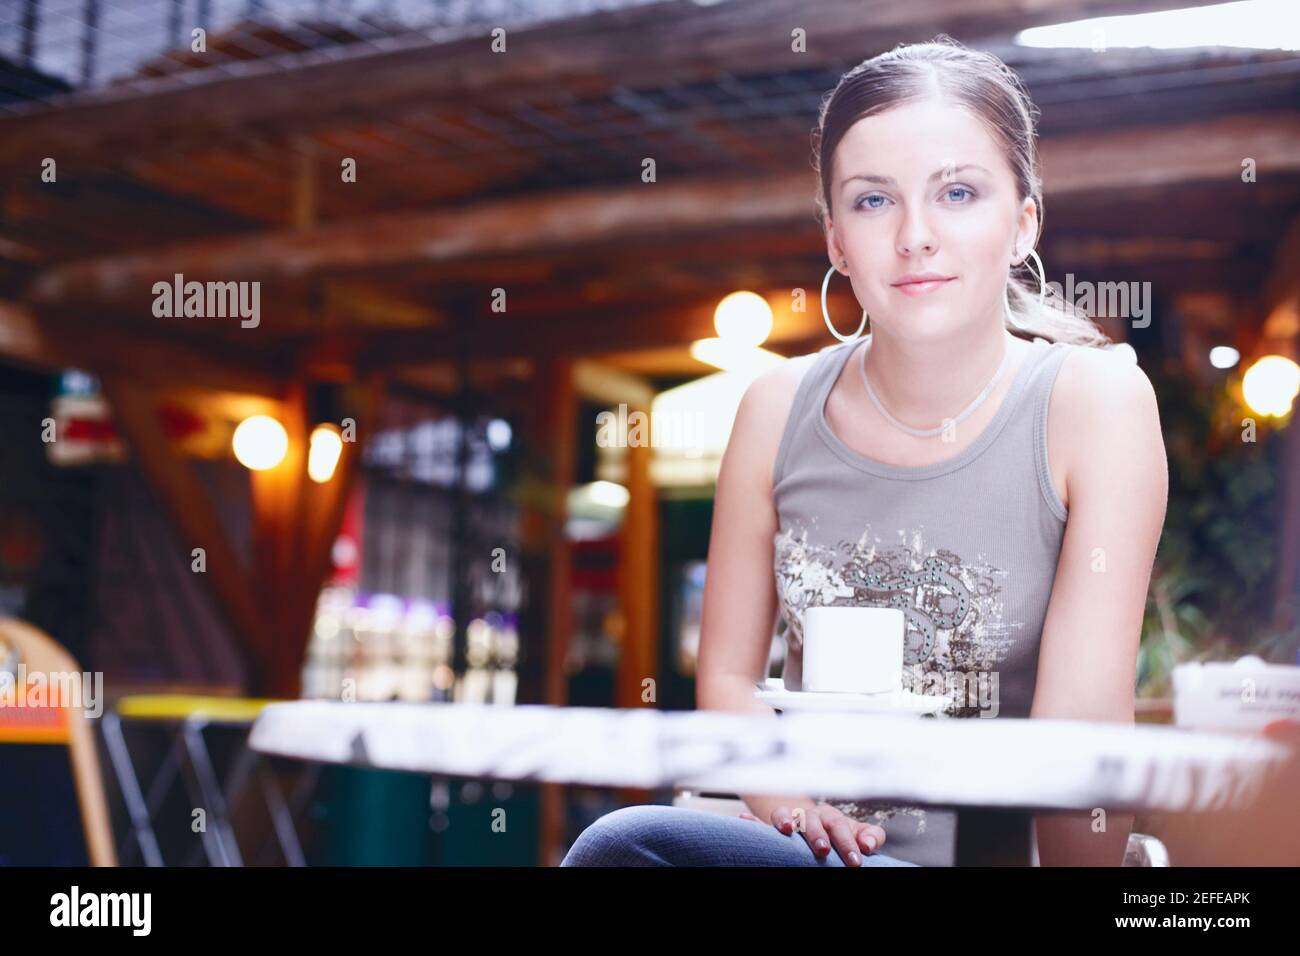 Portrait of a young woman sitting in a restaurant Banque D'Images